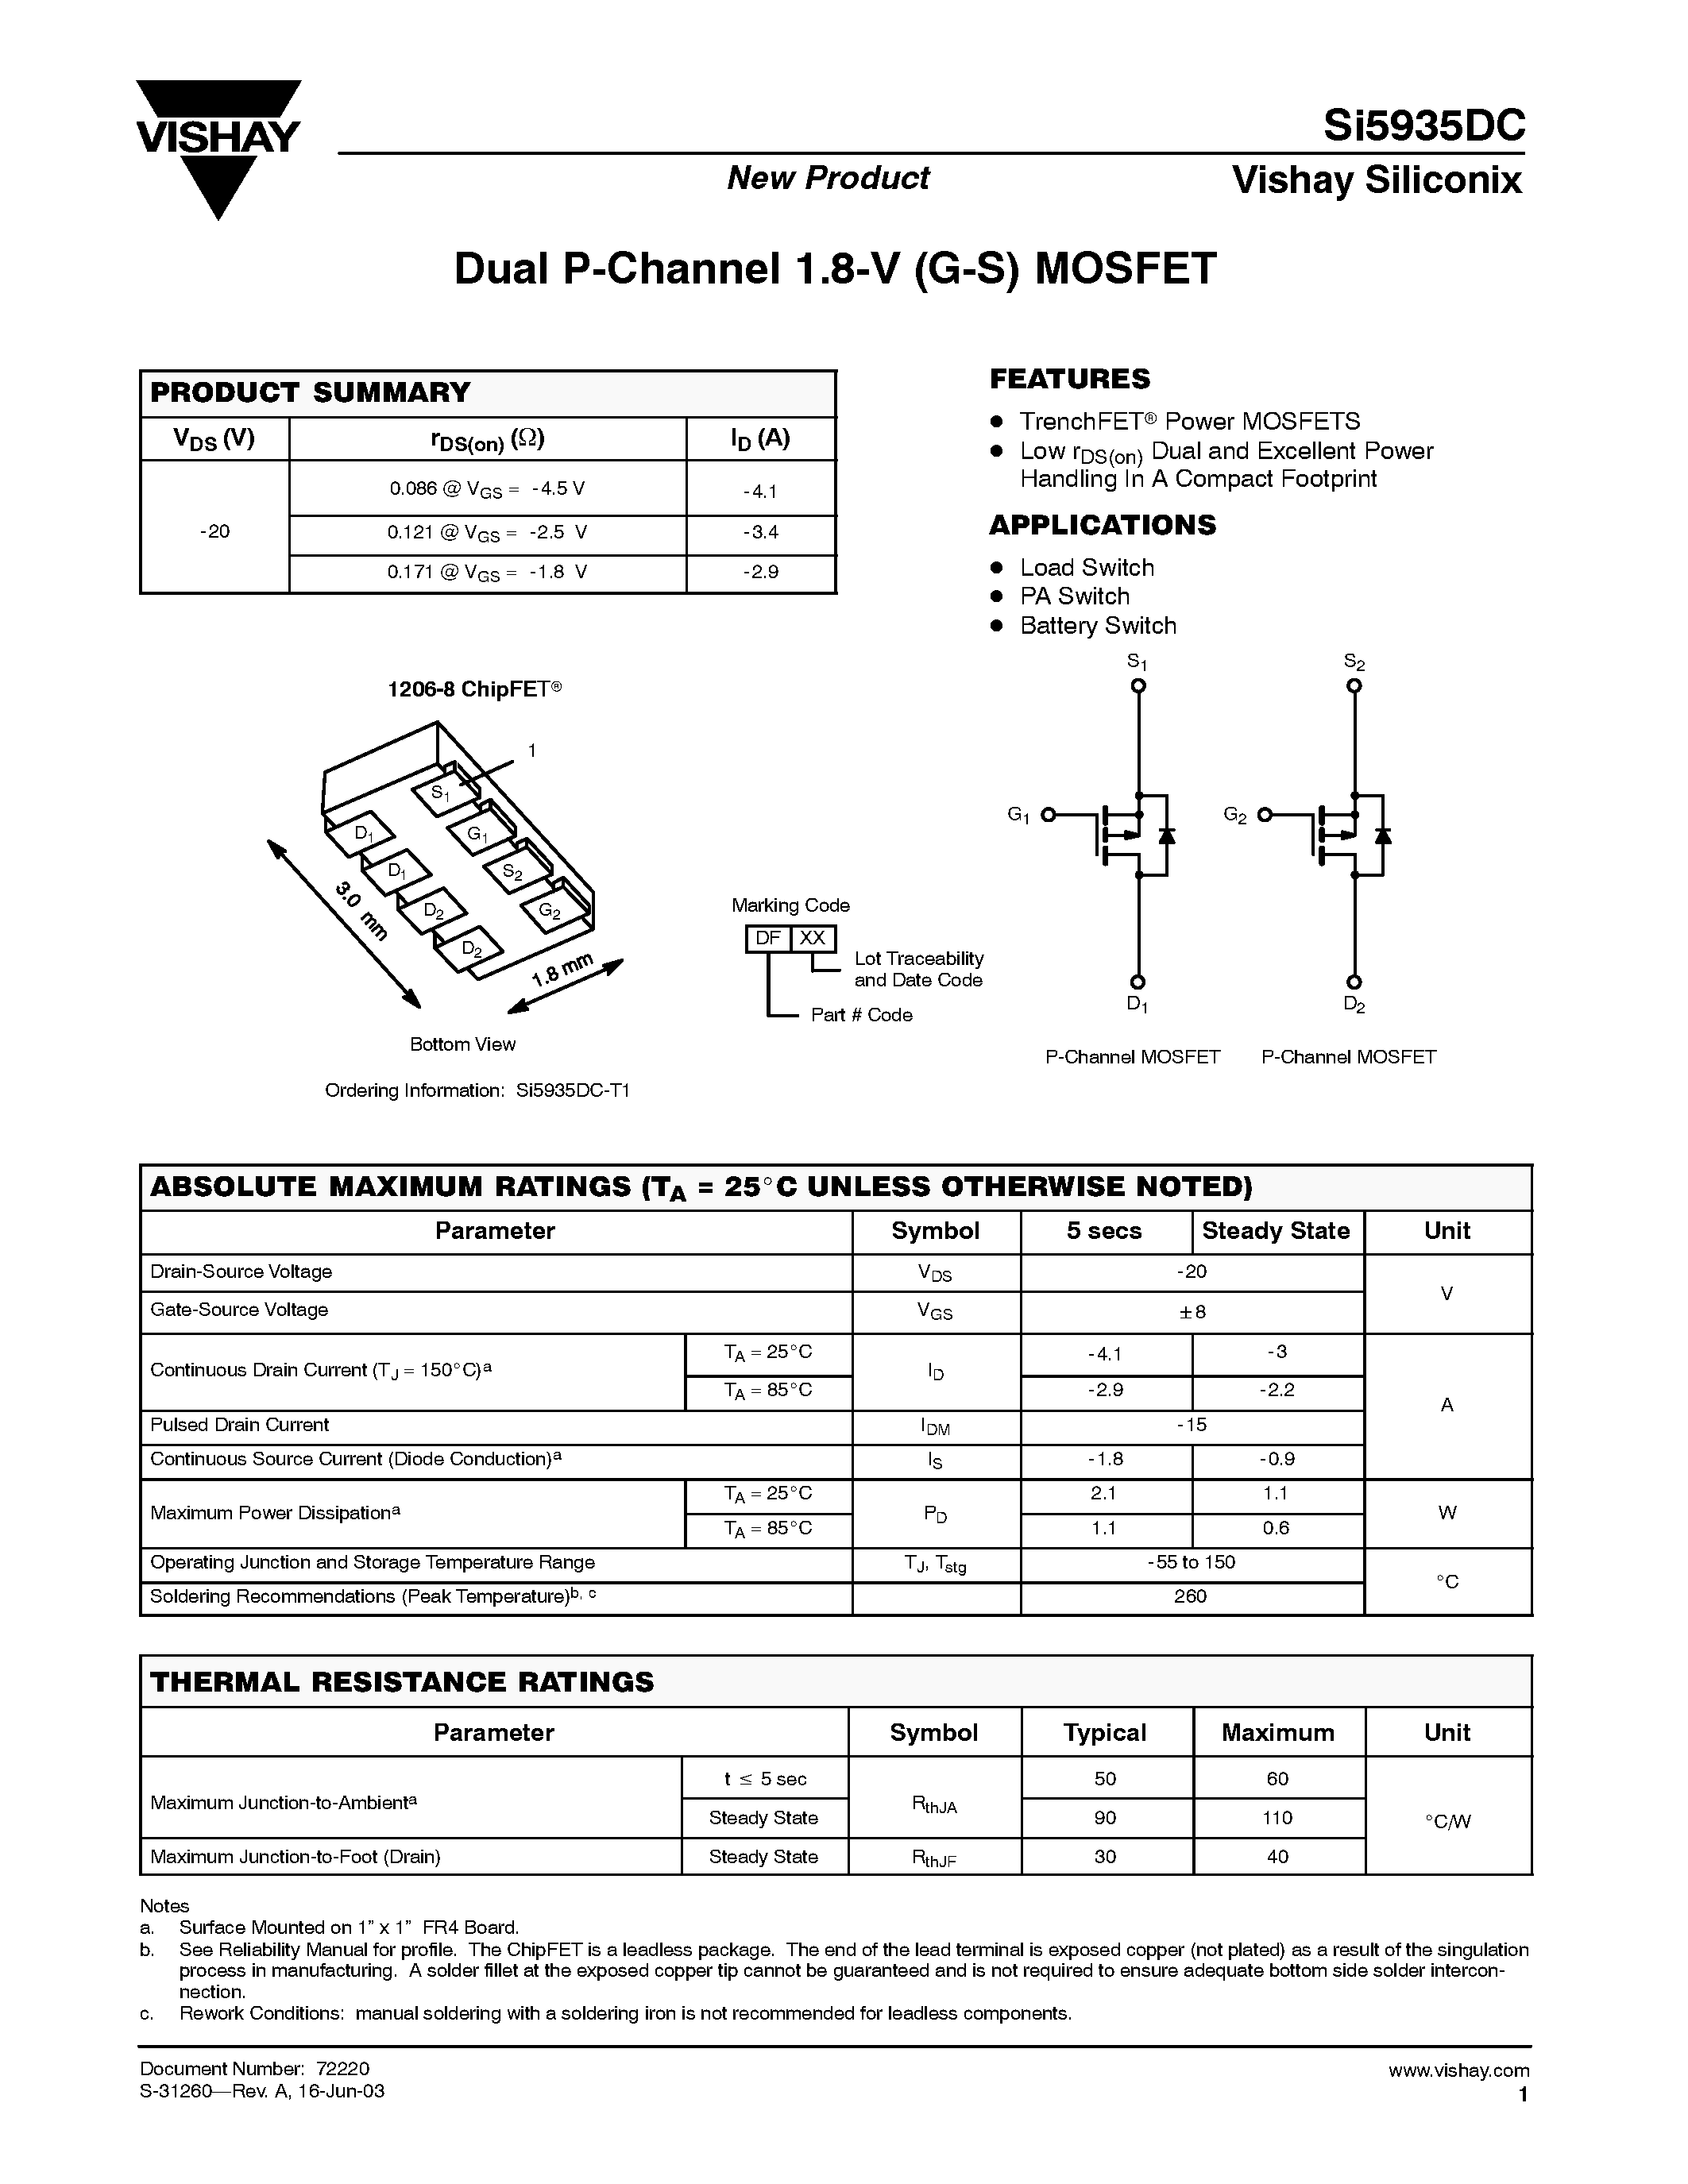 Даташит SI5935DC - Dual P-Channel 1.8-V (G-S) MOSFET страница 1